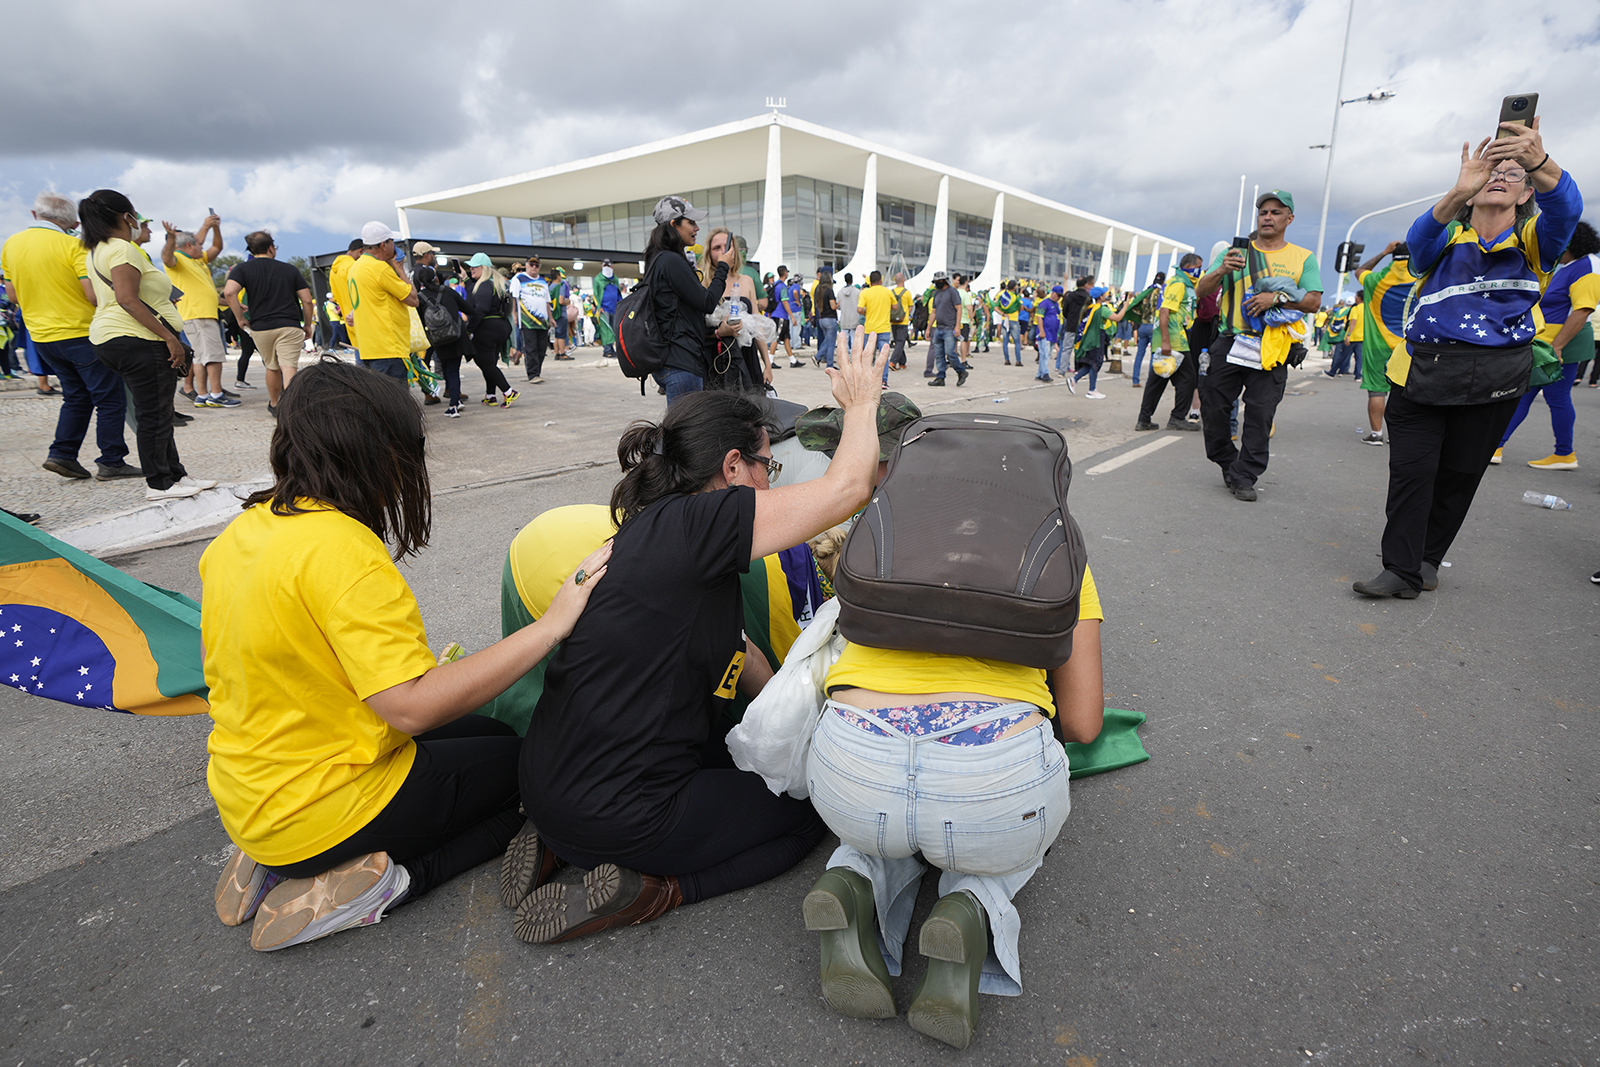 Supporters of Brazil's former President Jair Bolsonaro kneel to pray as they storm the Planalto Palace in Brasilia, Brazil, Sunday, Jan. 8, 2023. Planalto is the official workplace of the president of Brazil. (AP Photo/Eraldo Peres)